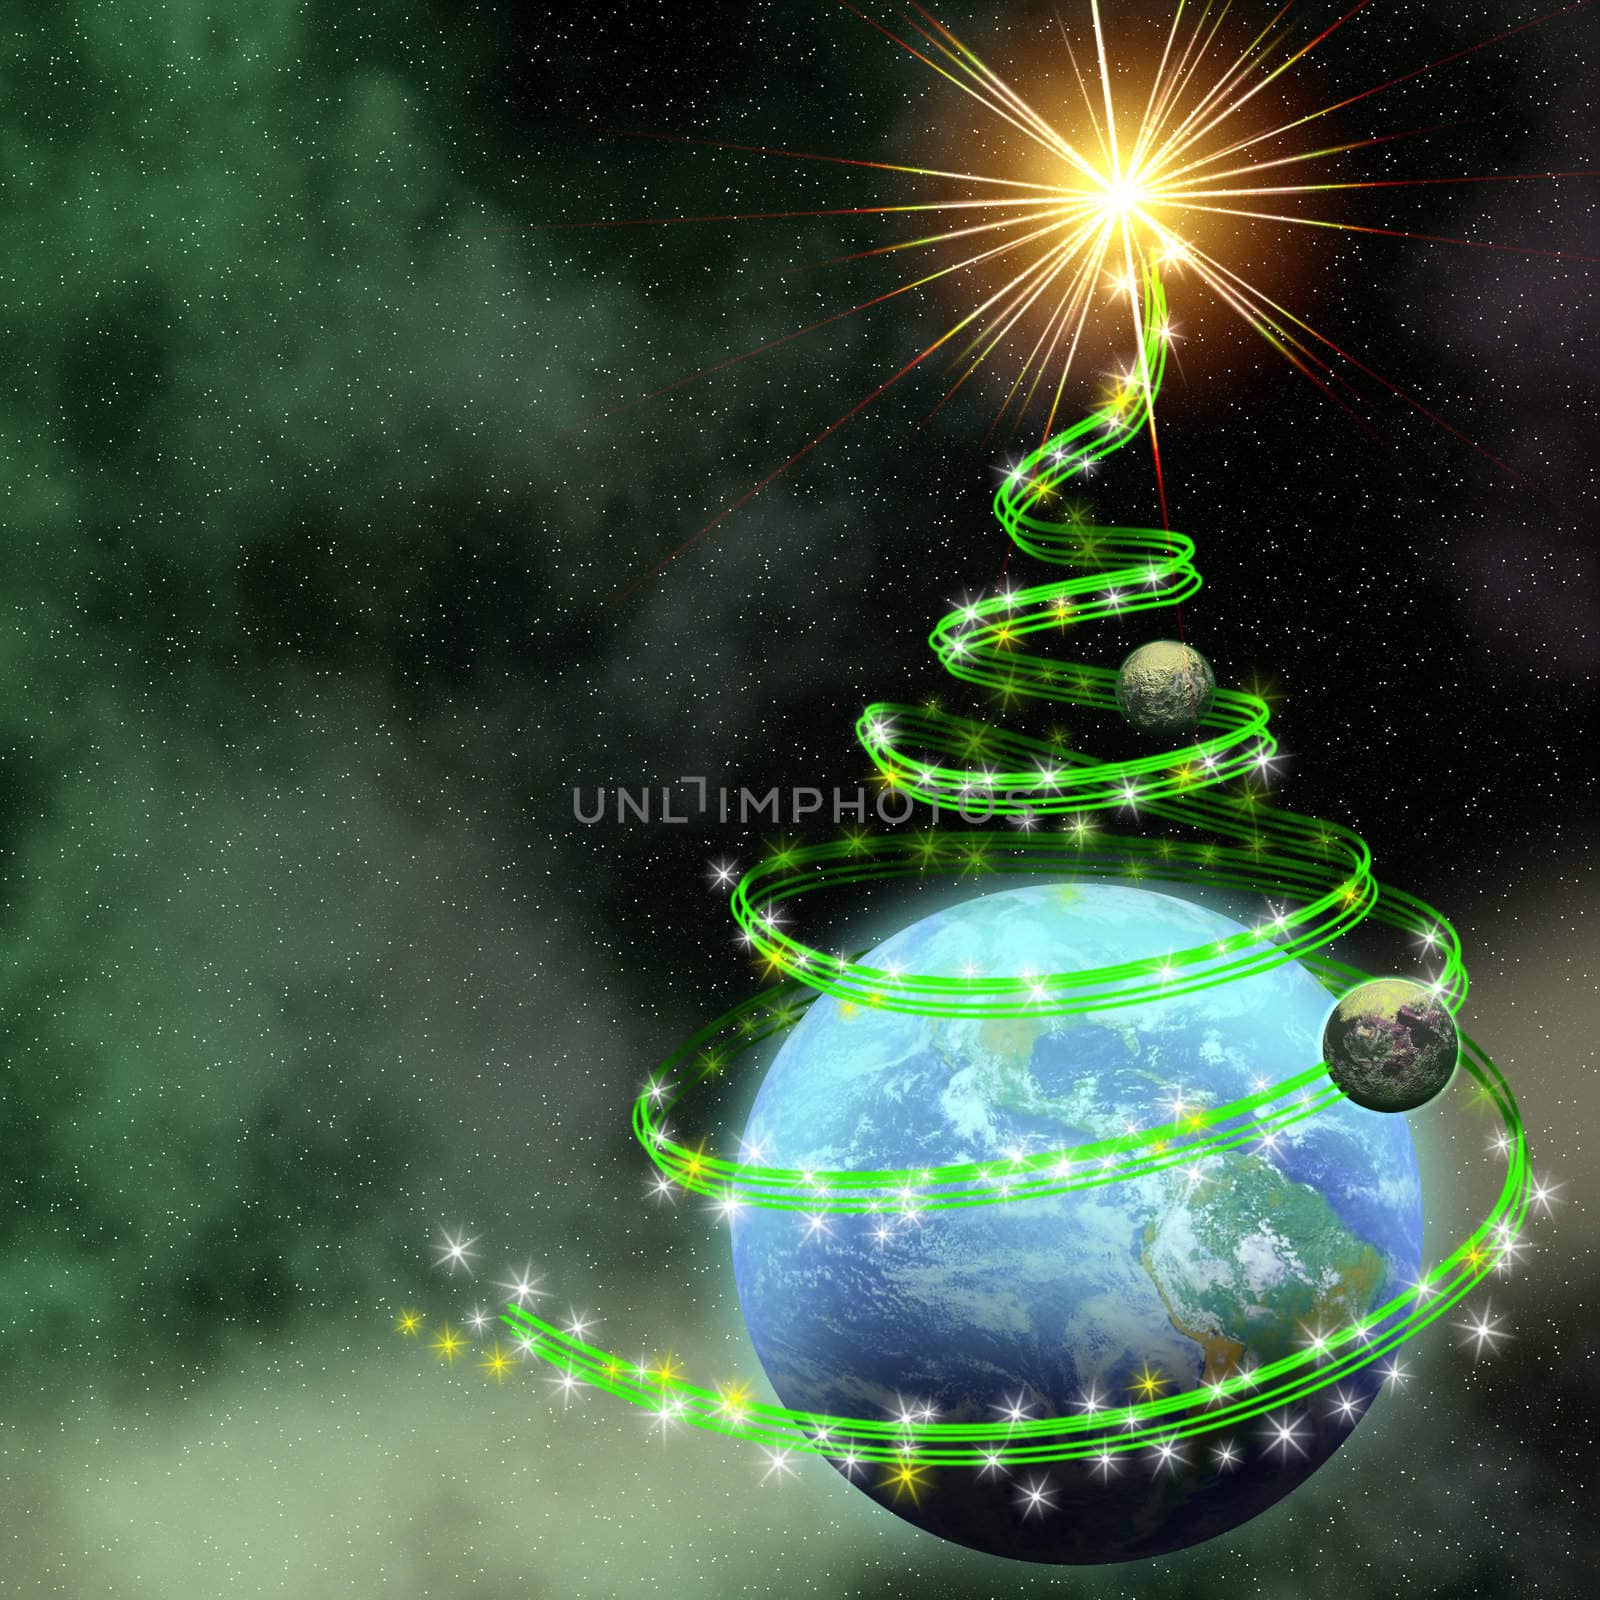 earth with abstract christmas tree spiral in open cosmos